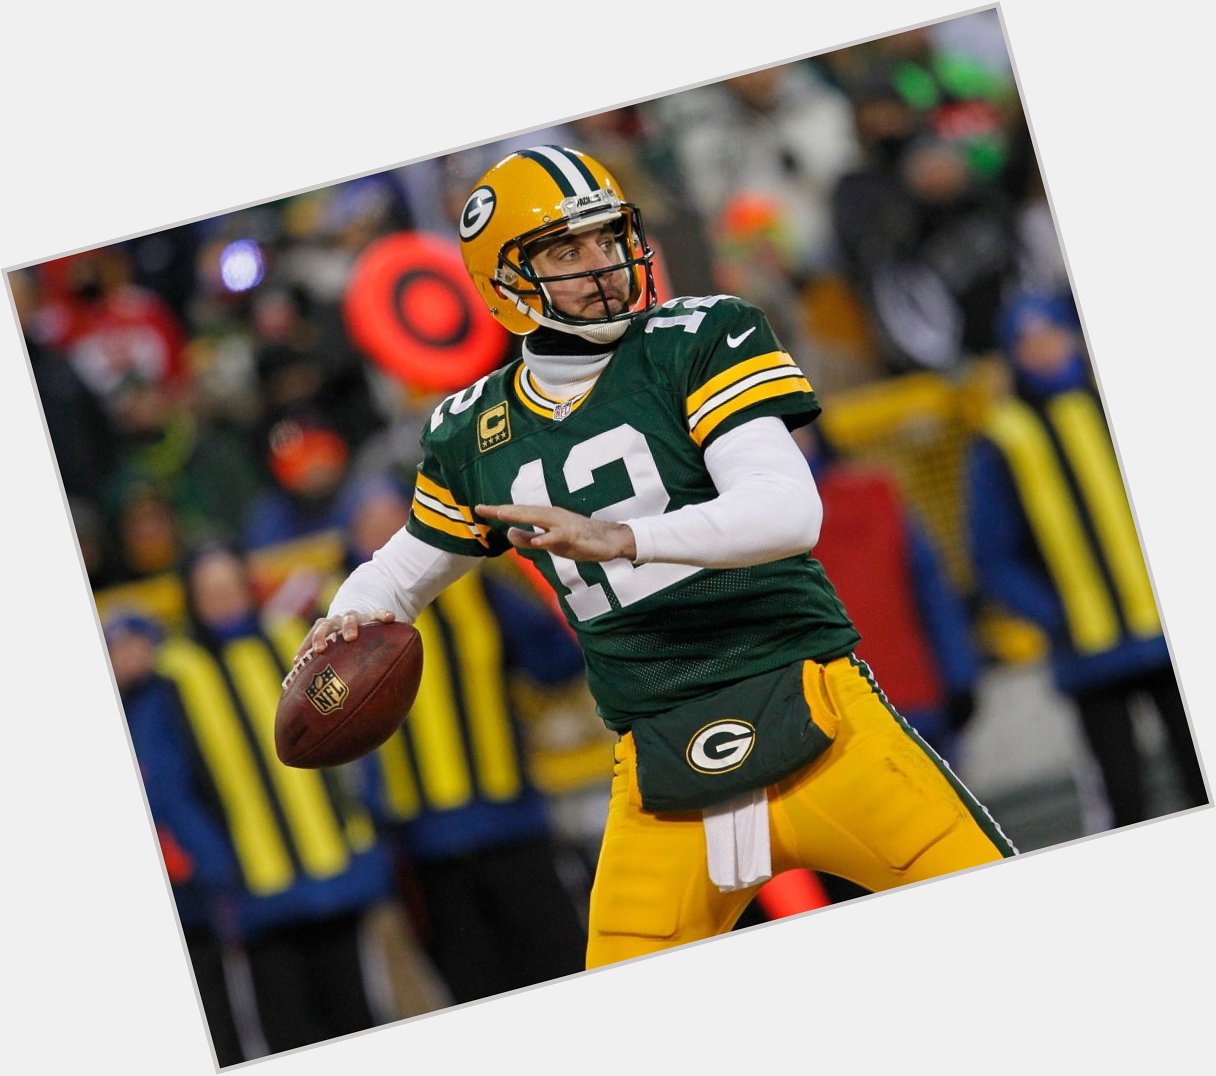 Happy 32nd birthday to Frater Aaron Rodgers (Sigma-Xi), quarterback for the Green Bay Packers. 